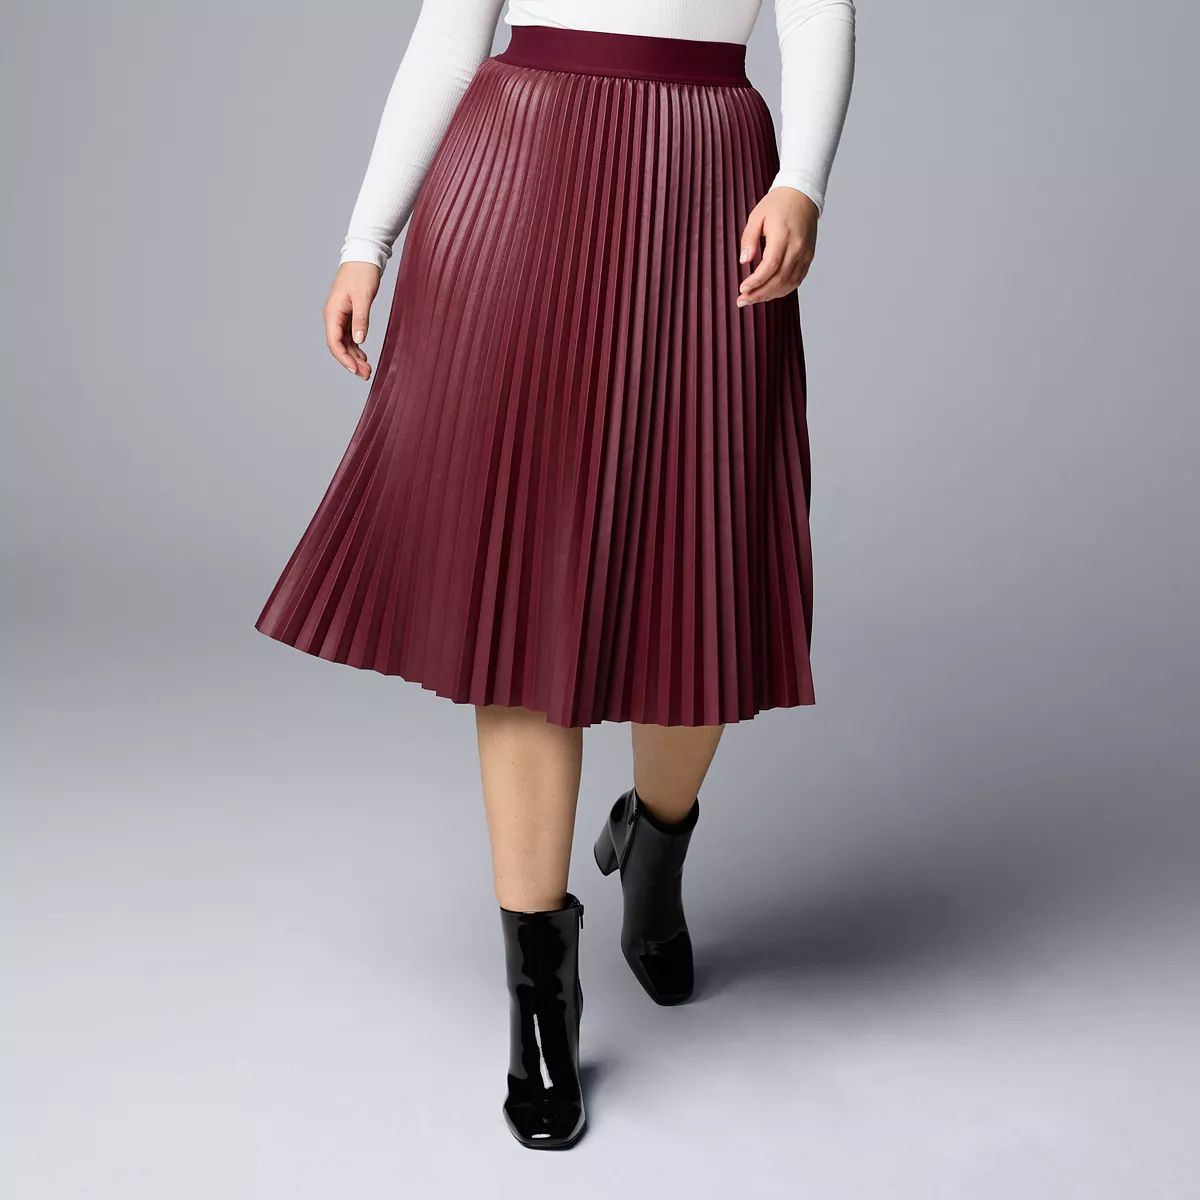 Women's Simply Vera Vera Wang Faux-Leather Pleated Skirt | Kohl's